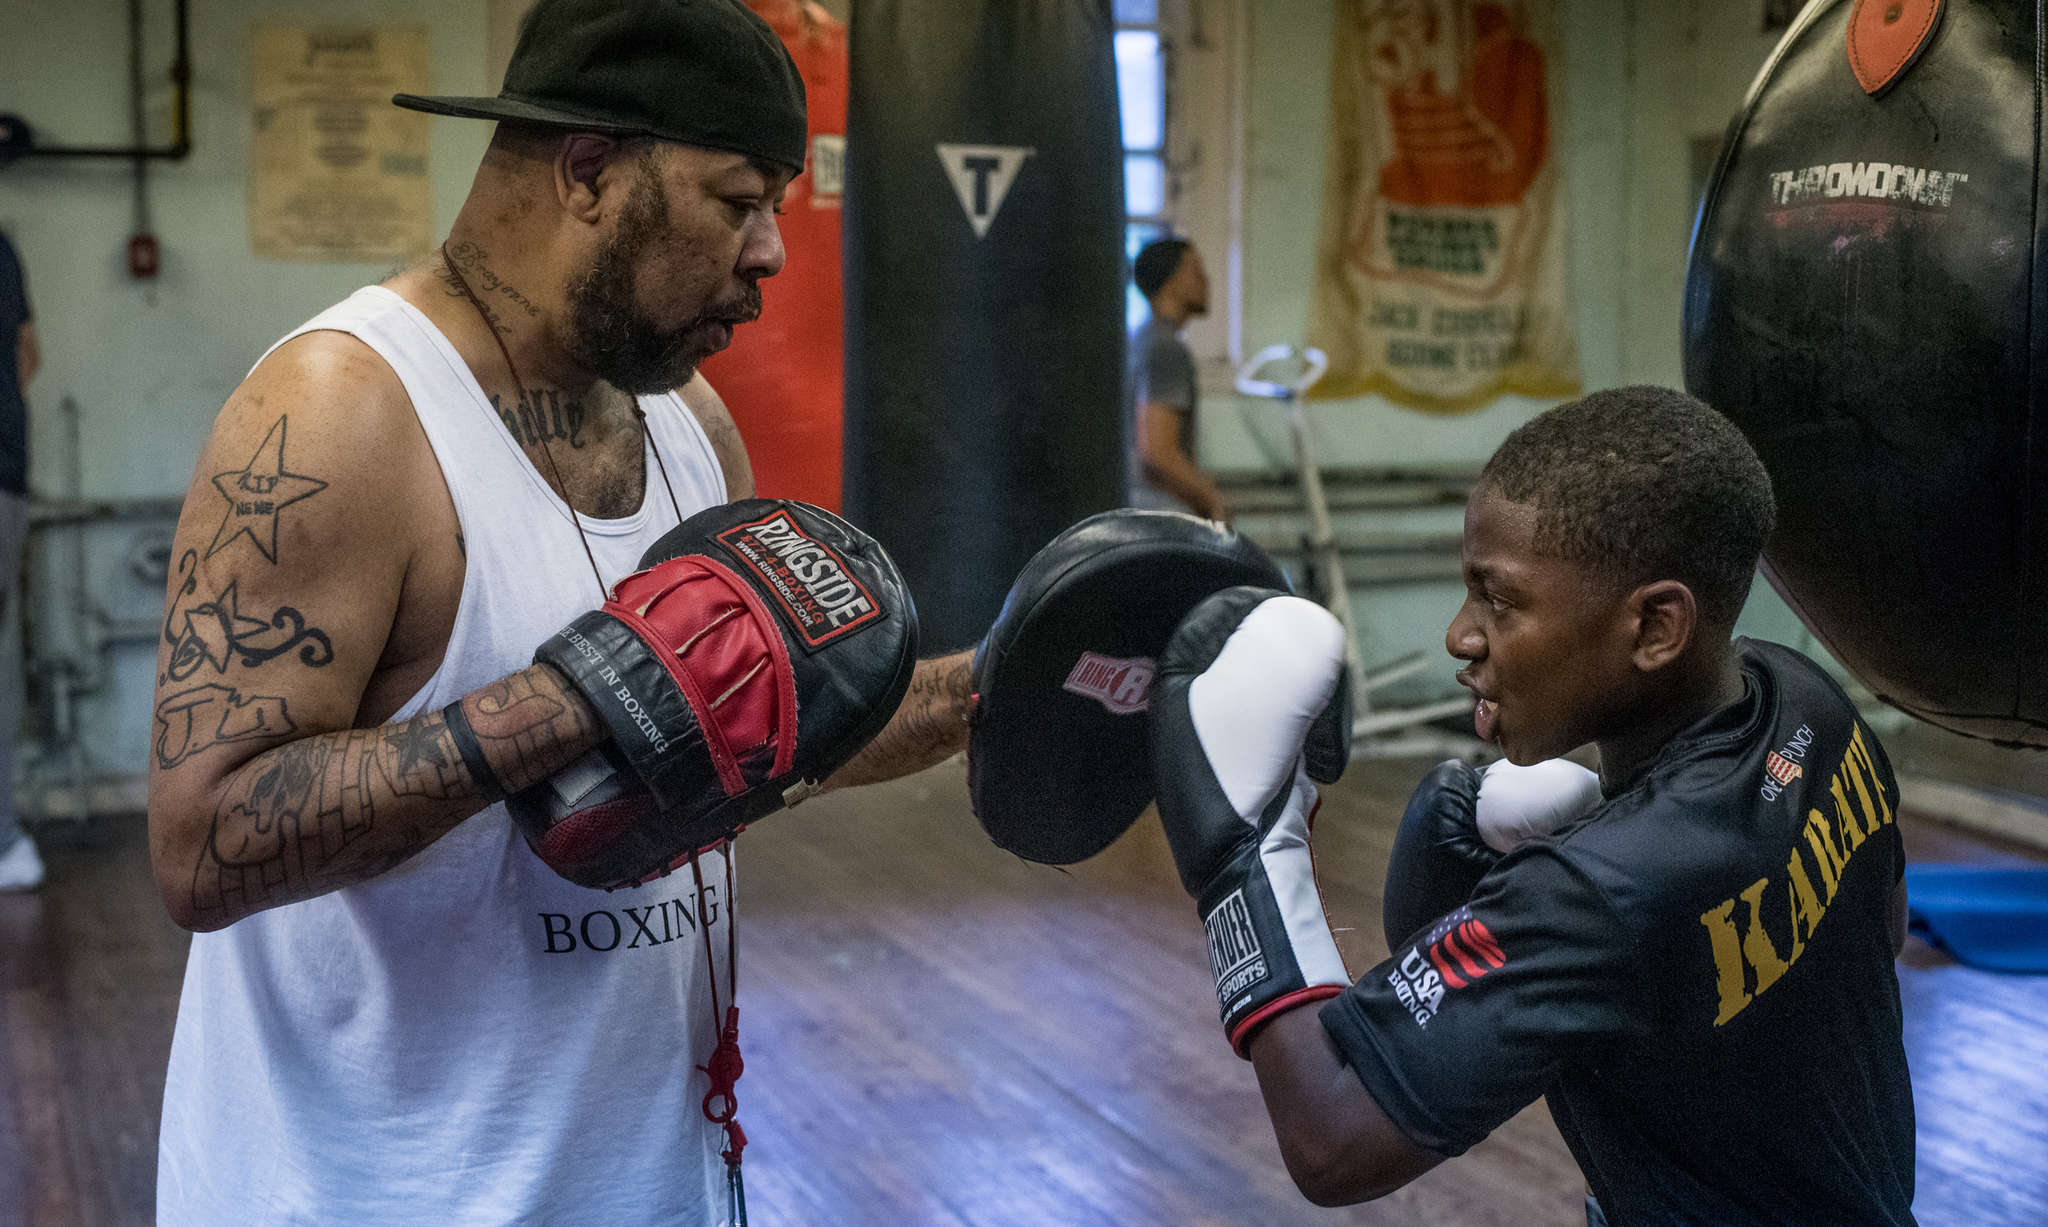 At Philly boxing clubs, retro sport takes on modern ills